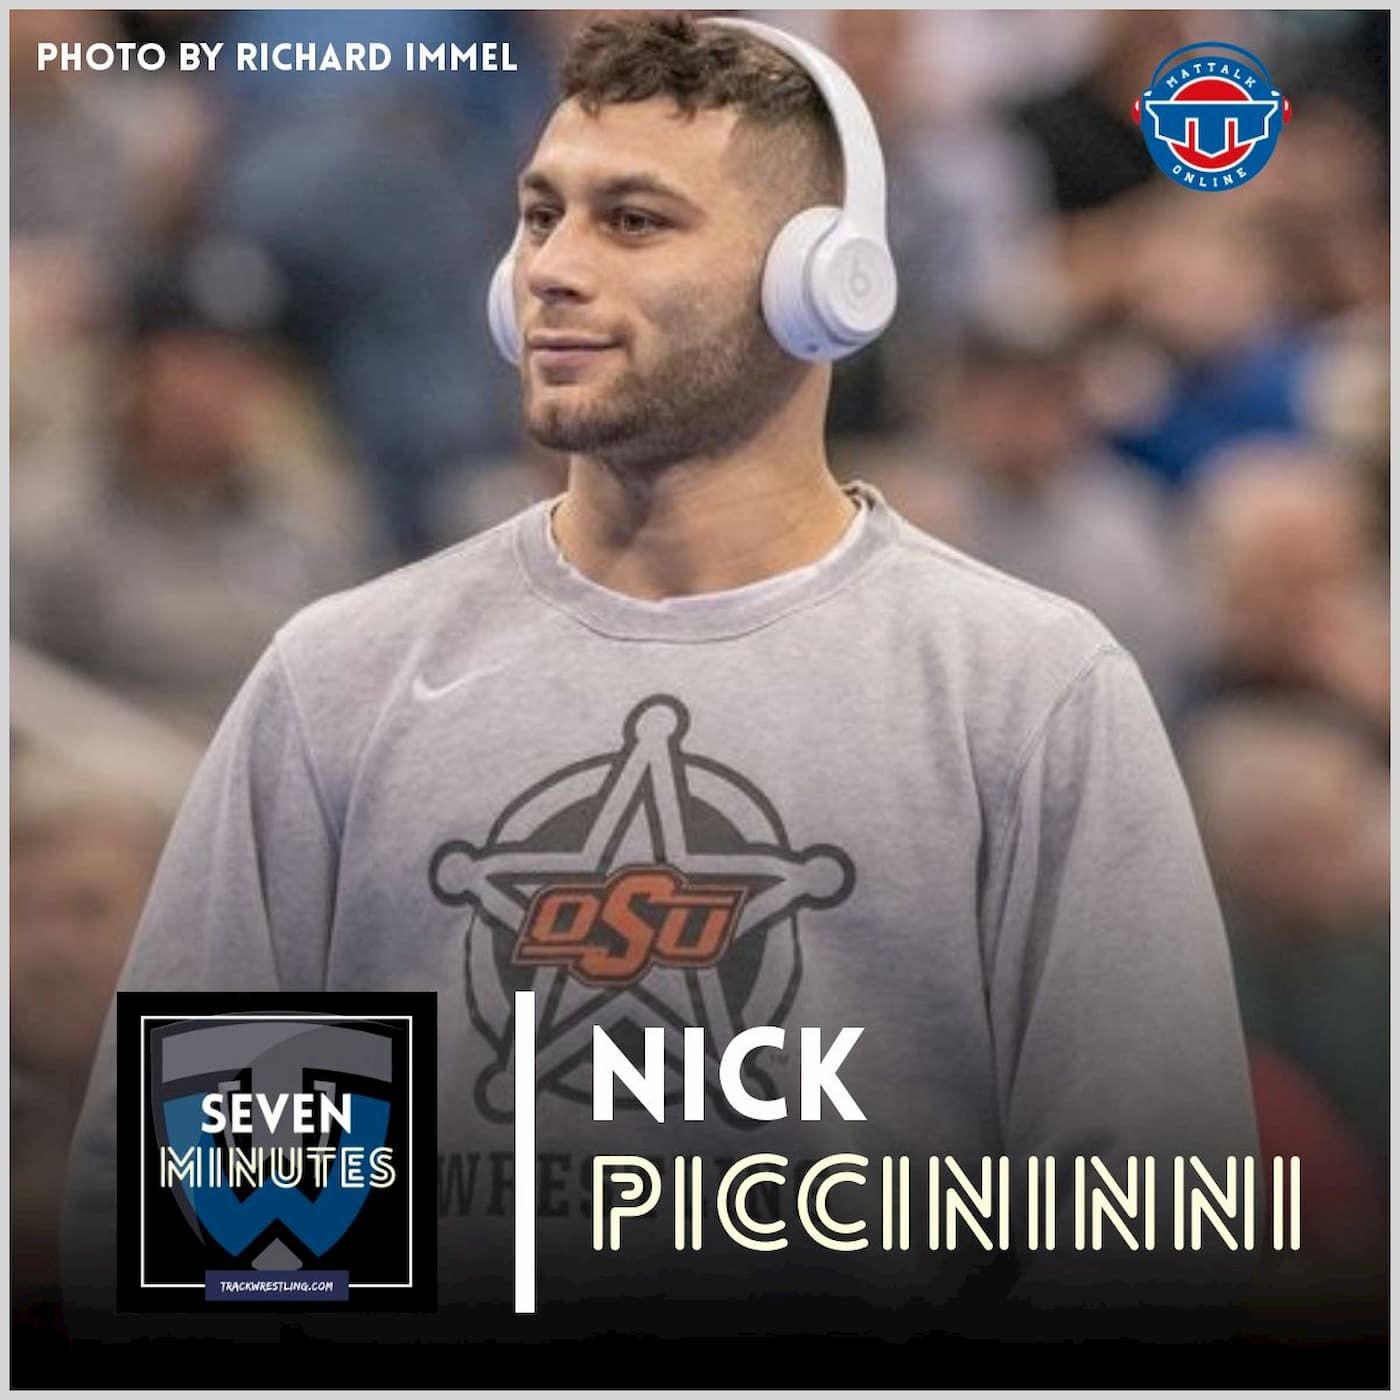 Seven Minutes with Oklahoma State’s Nick Piccininni